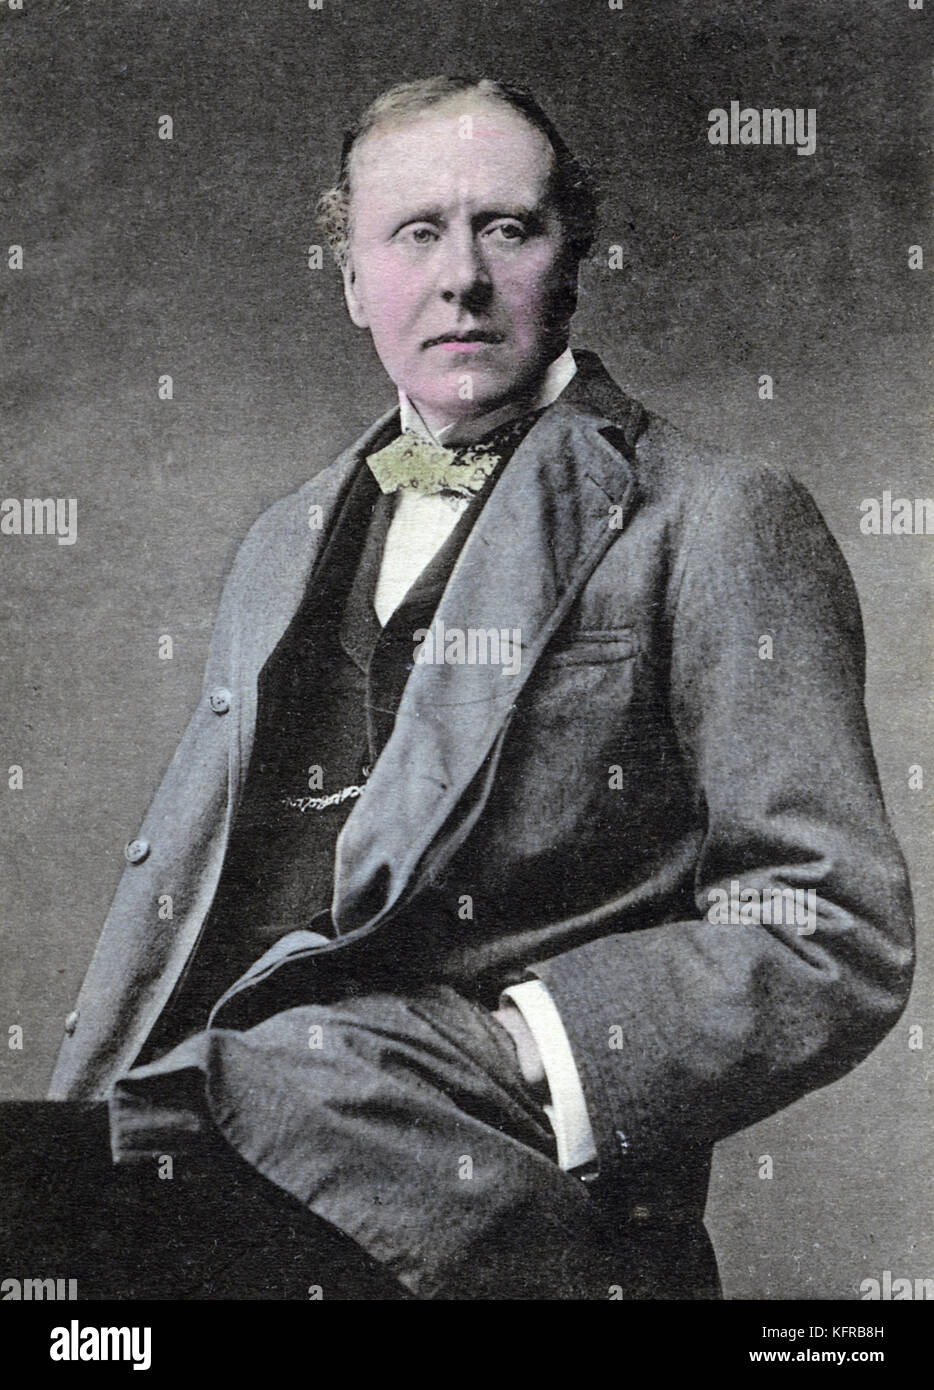 Herbert Beerbohm Tree - portrait. English actor and theatre manager, 17 December 1852 – 2 July 1917. Stock Photo